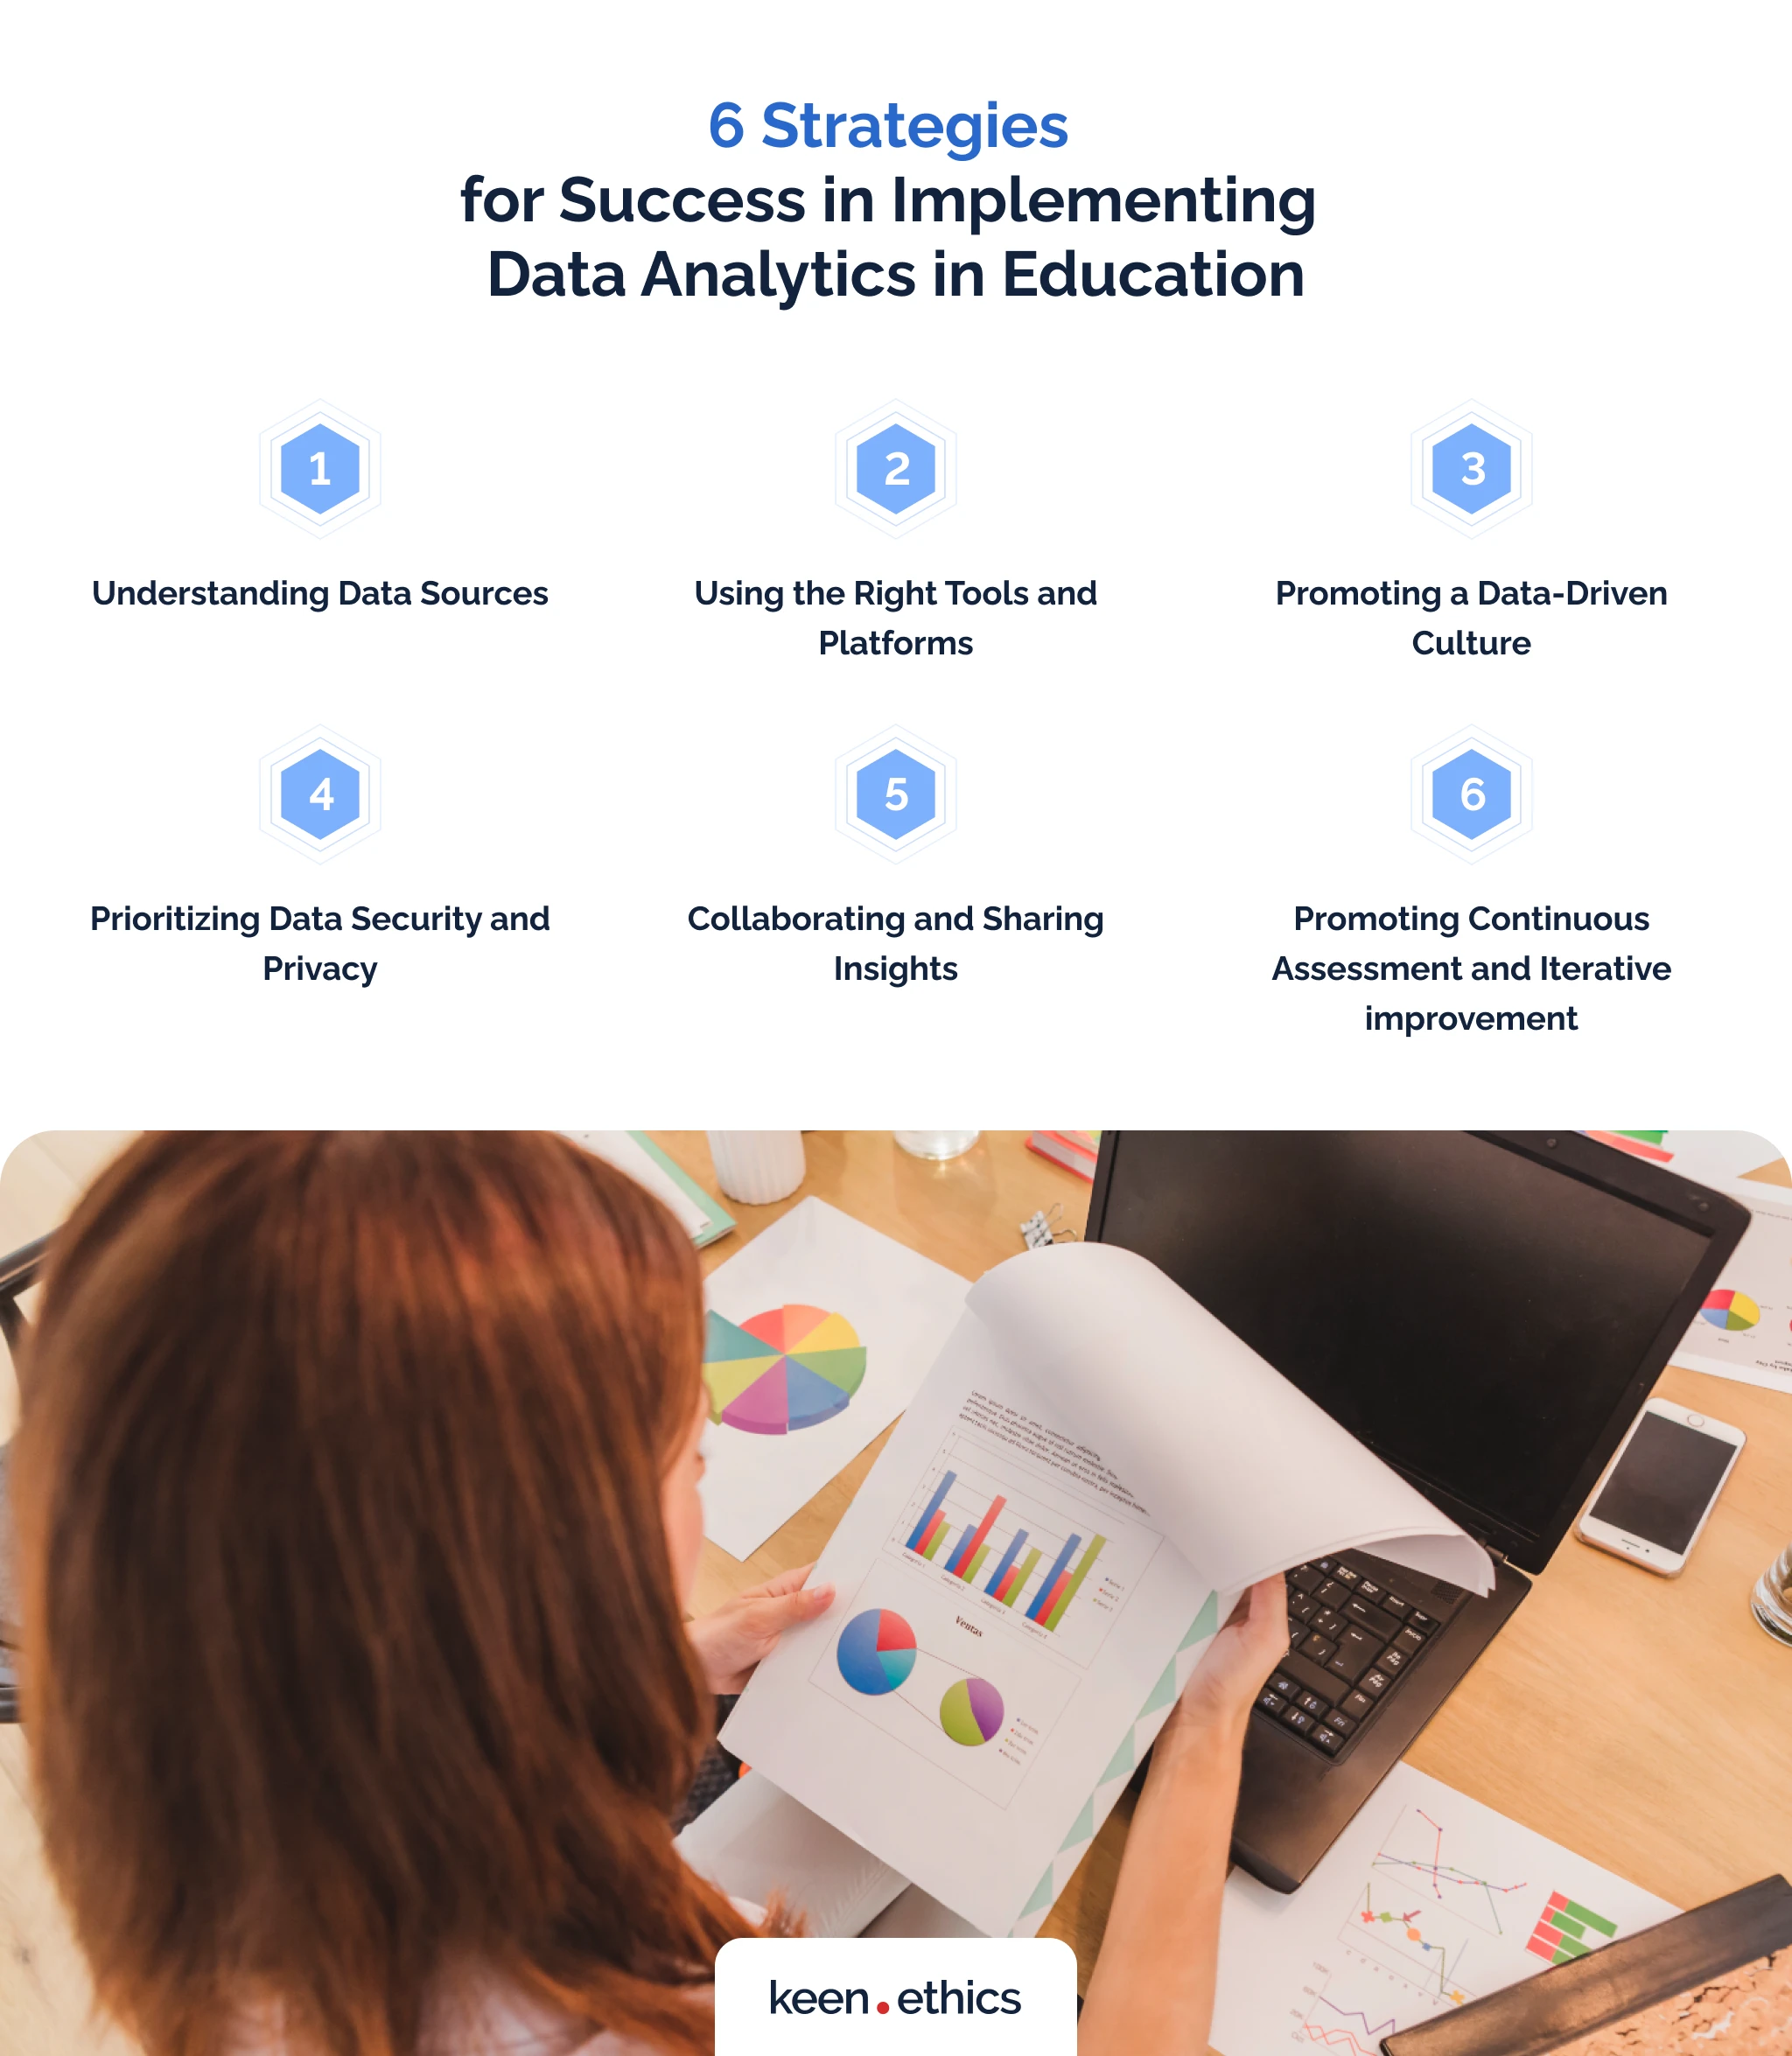 6 strategies for success in implementing data analytics in education